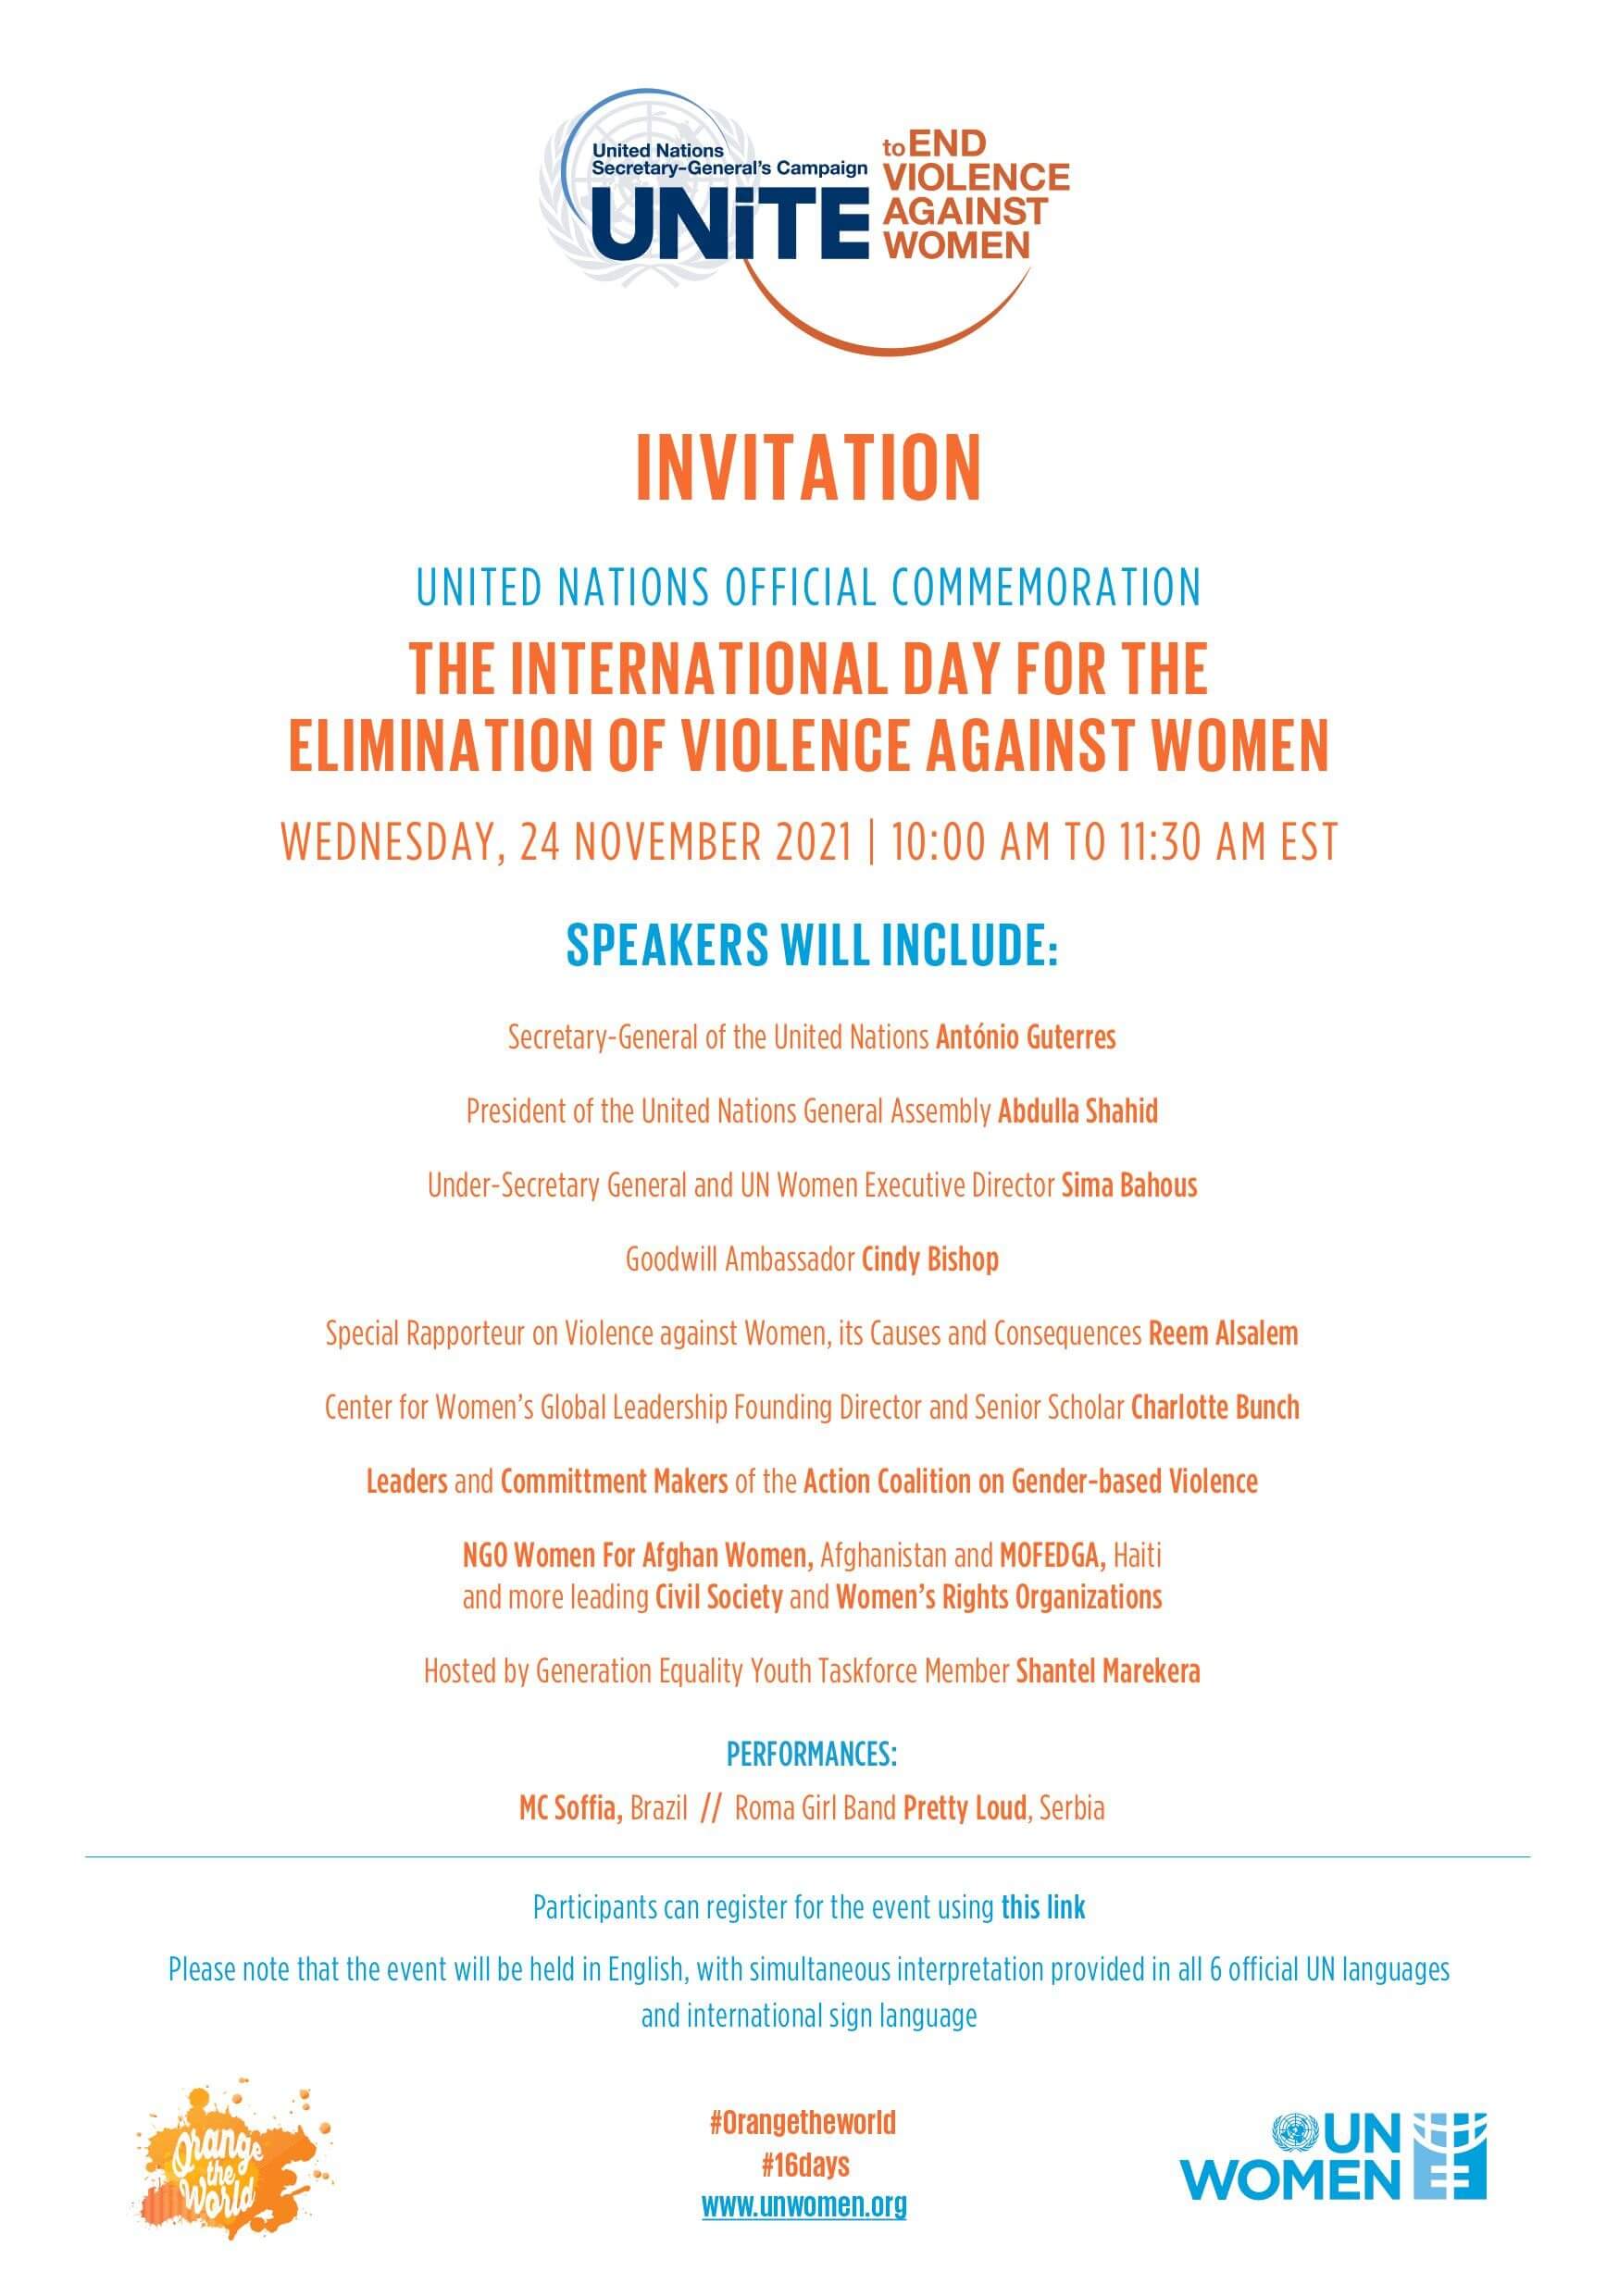 UN official commemoration of the International Day for the Elimination of Violence against Women